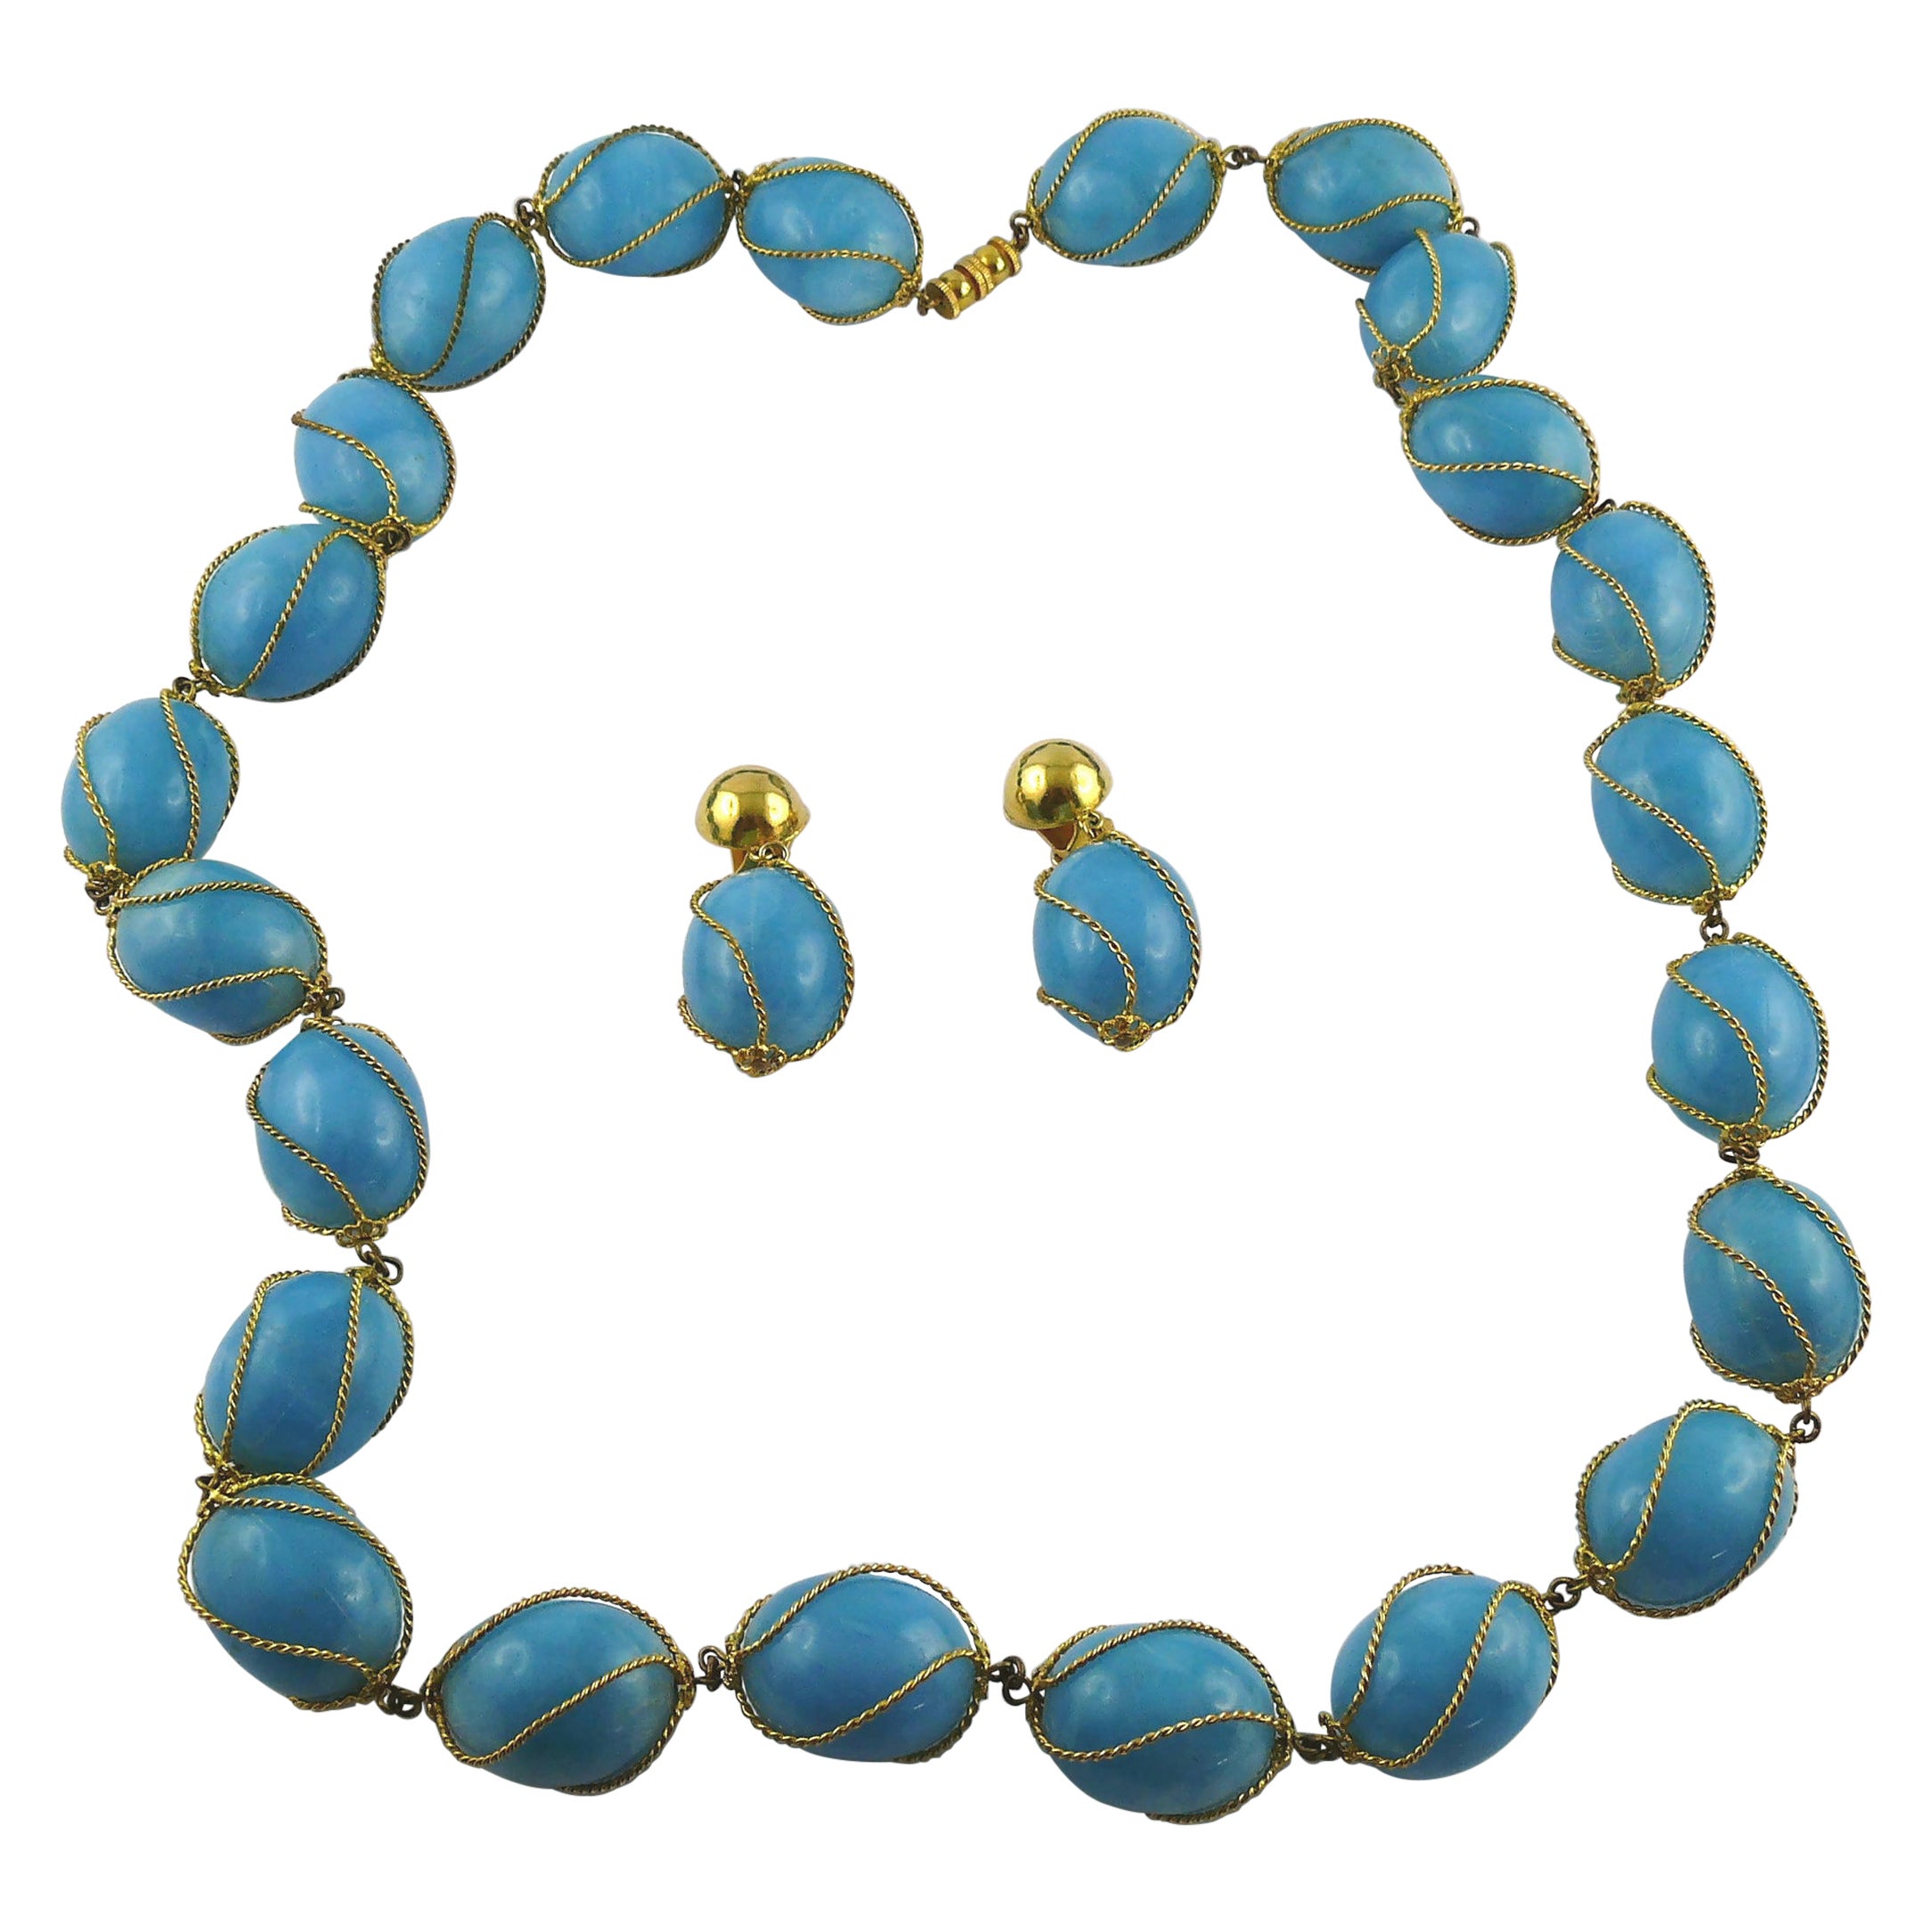 Christian Dior Vintage Encaged Blue Resin Beads Necklace and Earrings Set 1966 For Sale